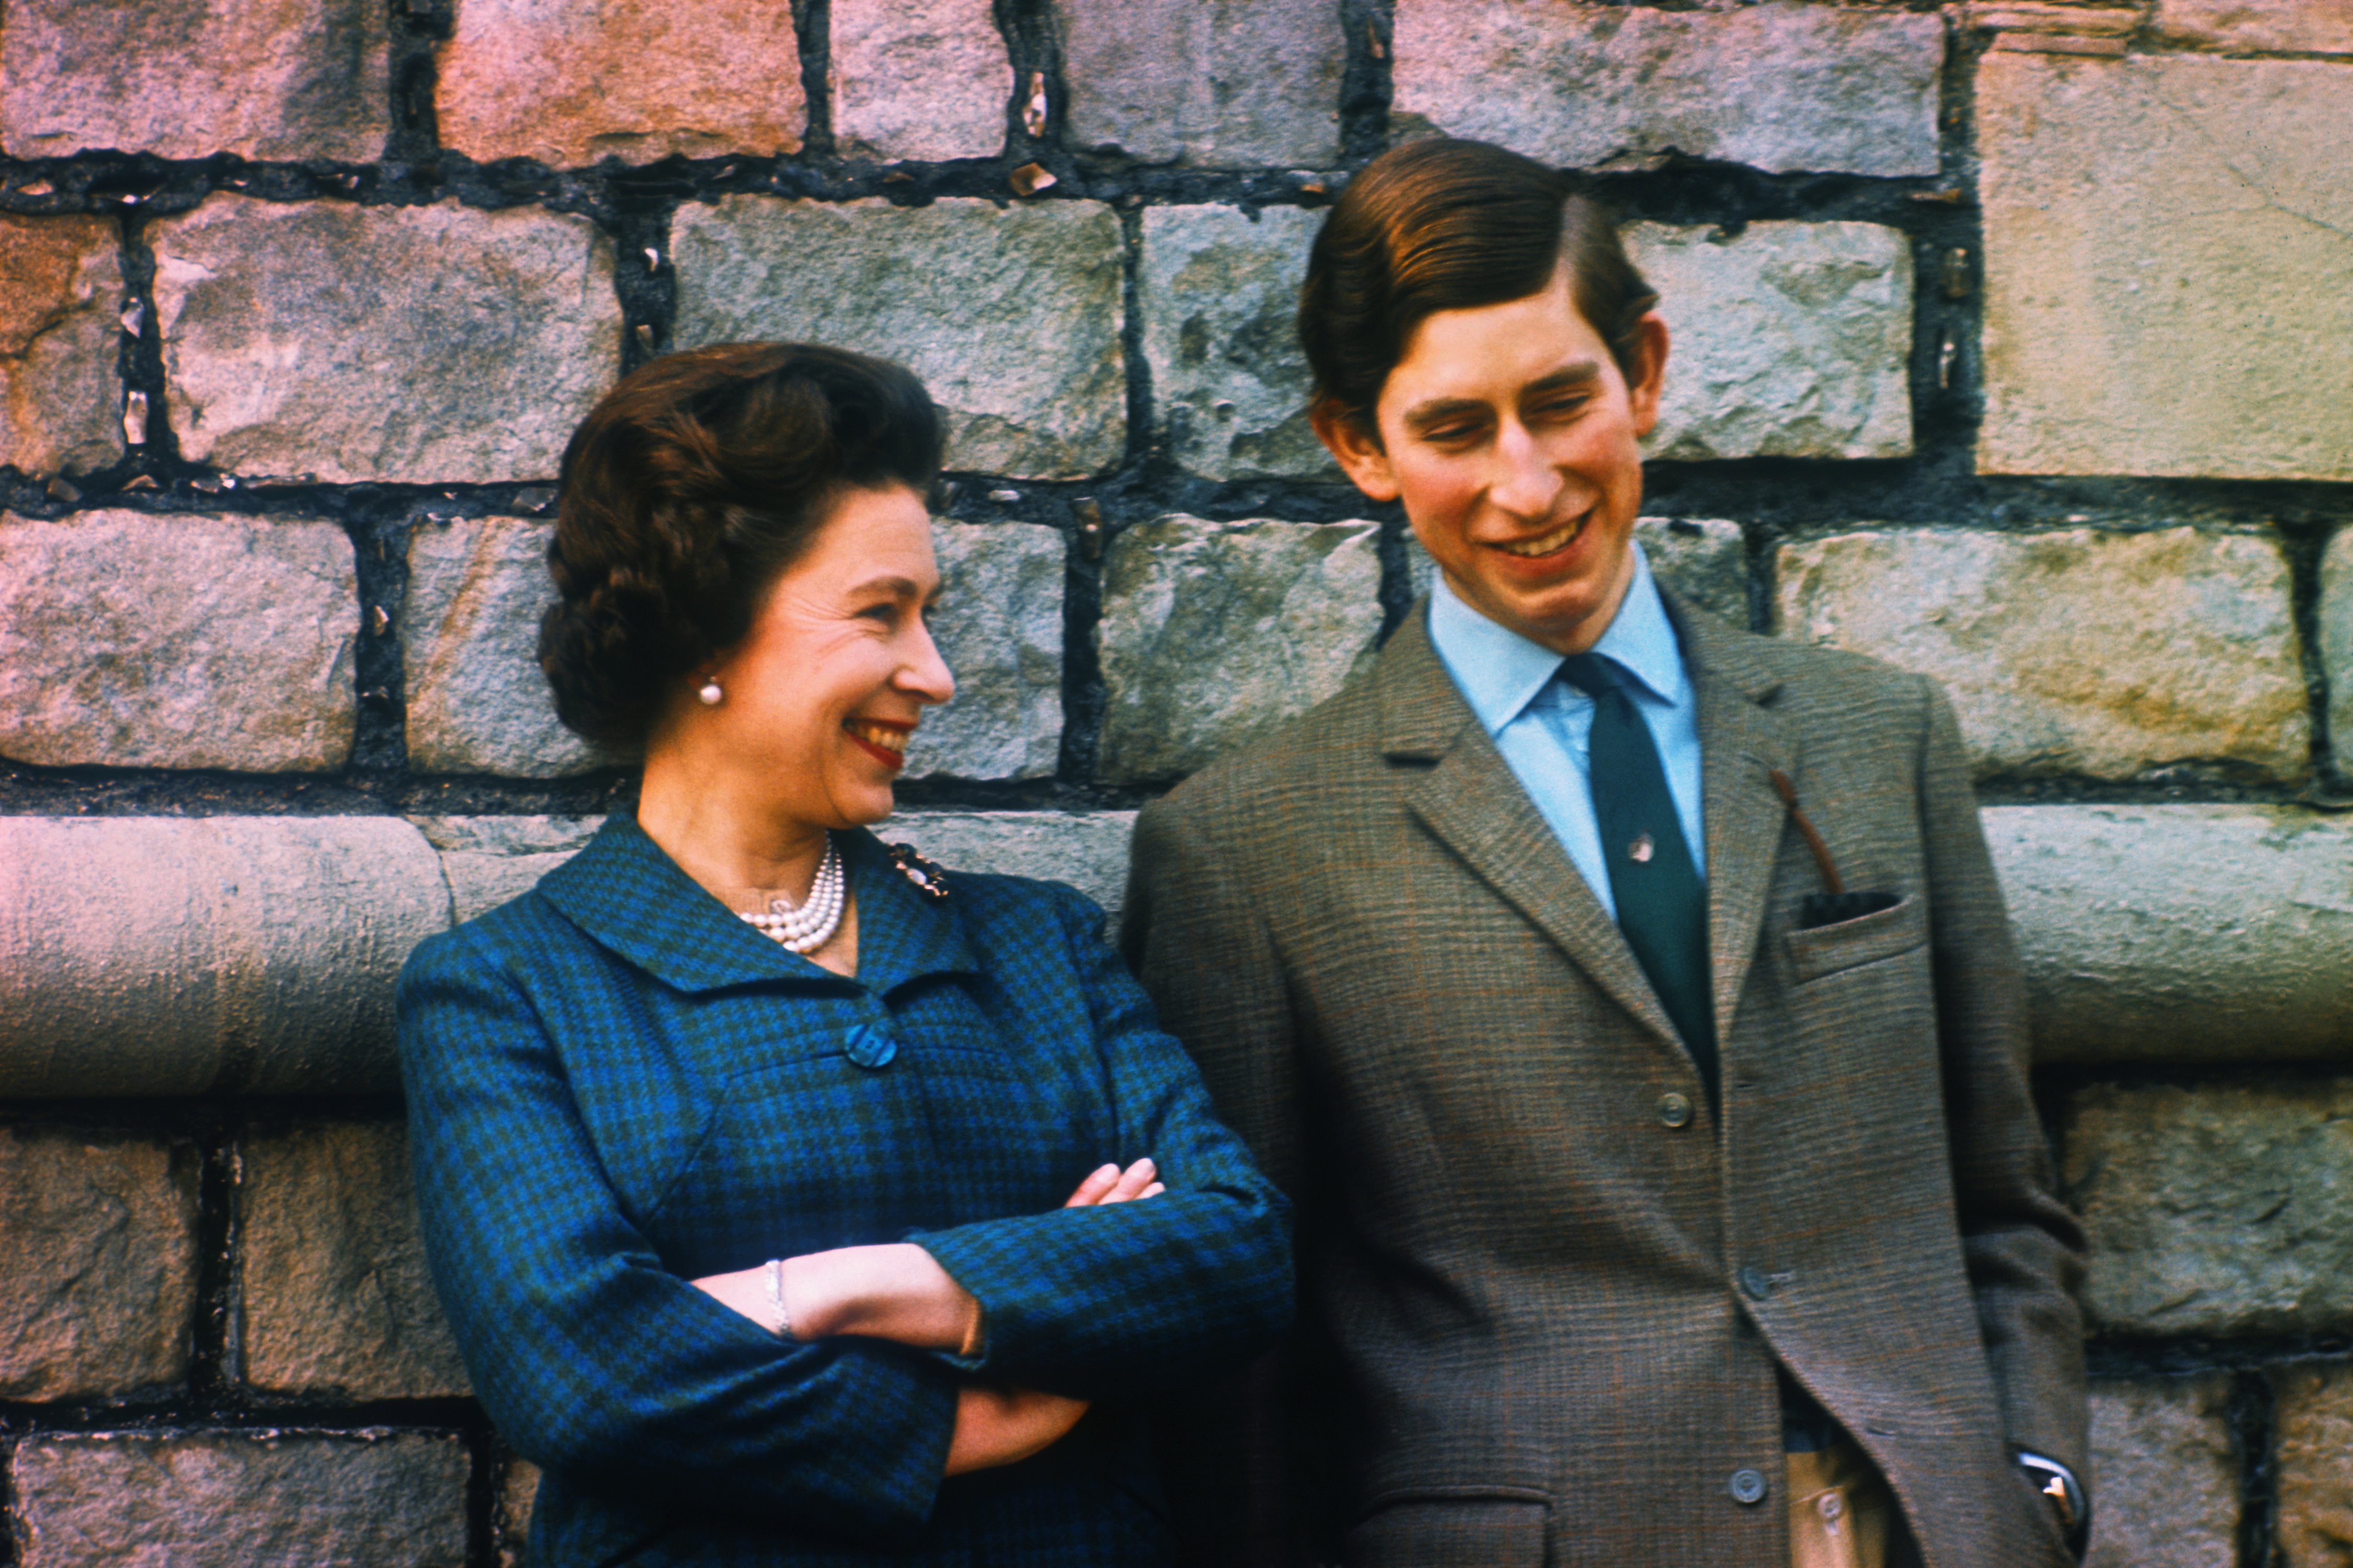 Prince Charles and Queen Elizabeth at their Windsor home in 1969 | Source: Getty Images